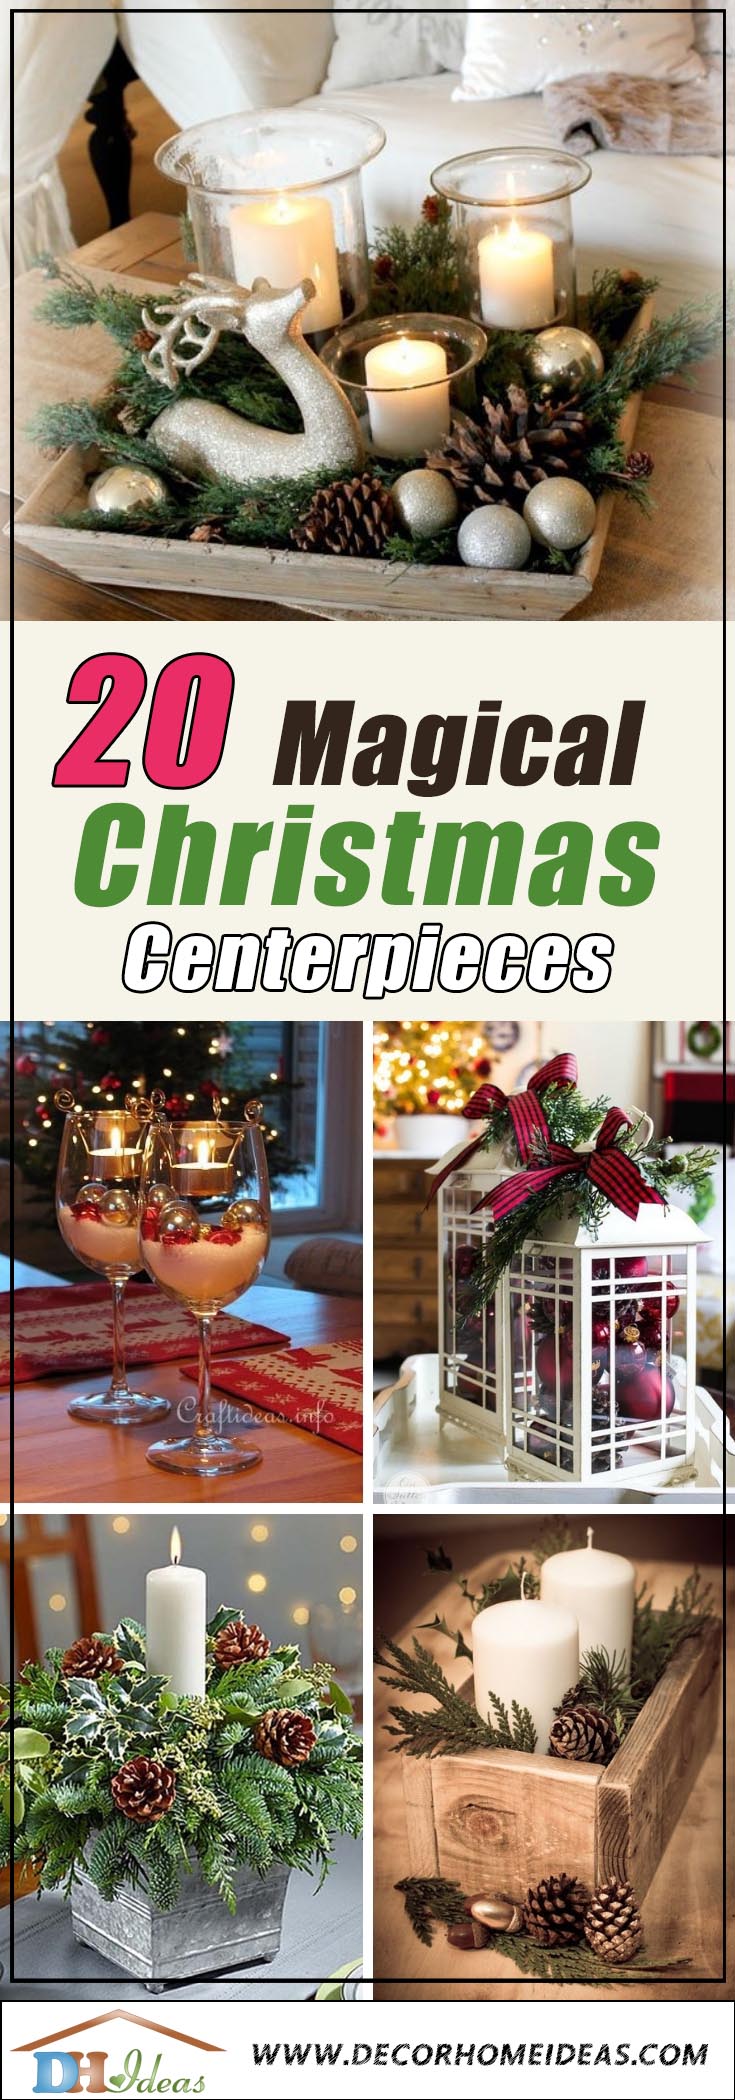 20 Magical Christmas Centerpieces That Will Make You Feel The Joy Of ...